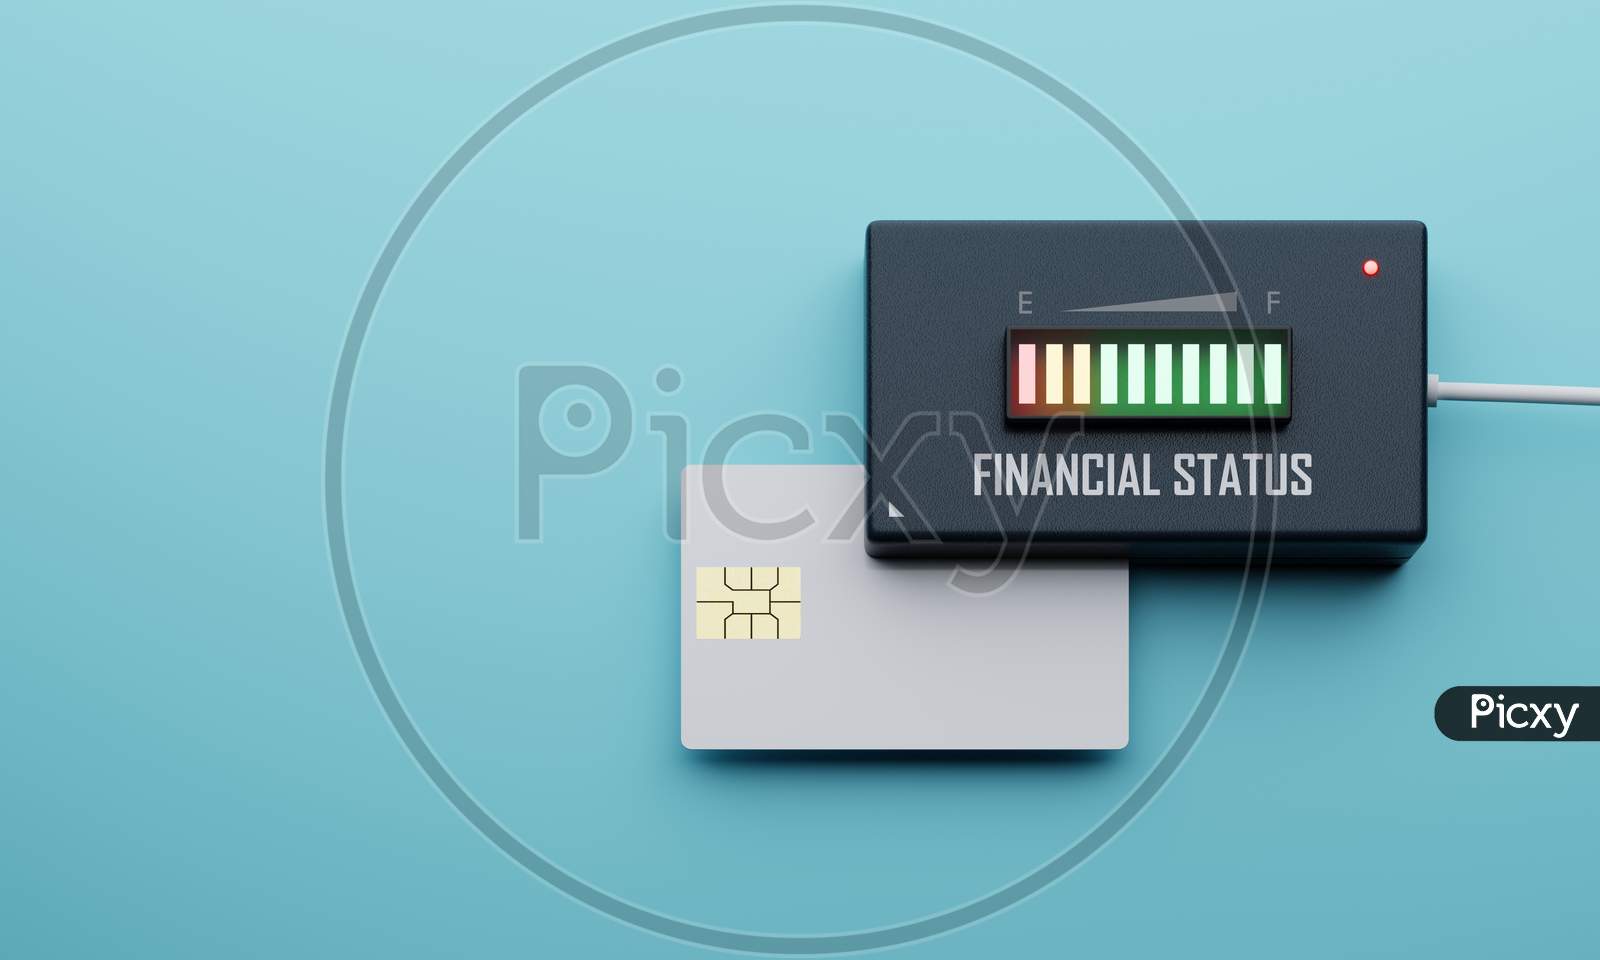 Credit Card Financial Status Balance Checking Device On Blue Background. Business Economy And Investment Concept. Cash Flow Electronic Indicator Machine Theme. 3D Illustration Rendering Graphic Design